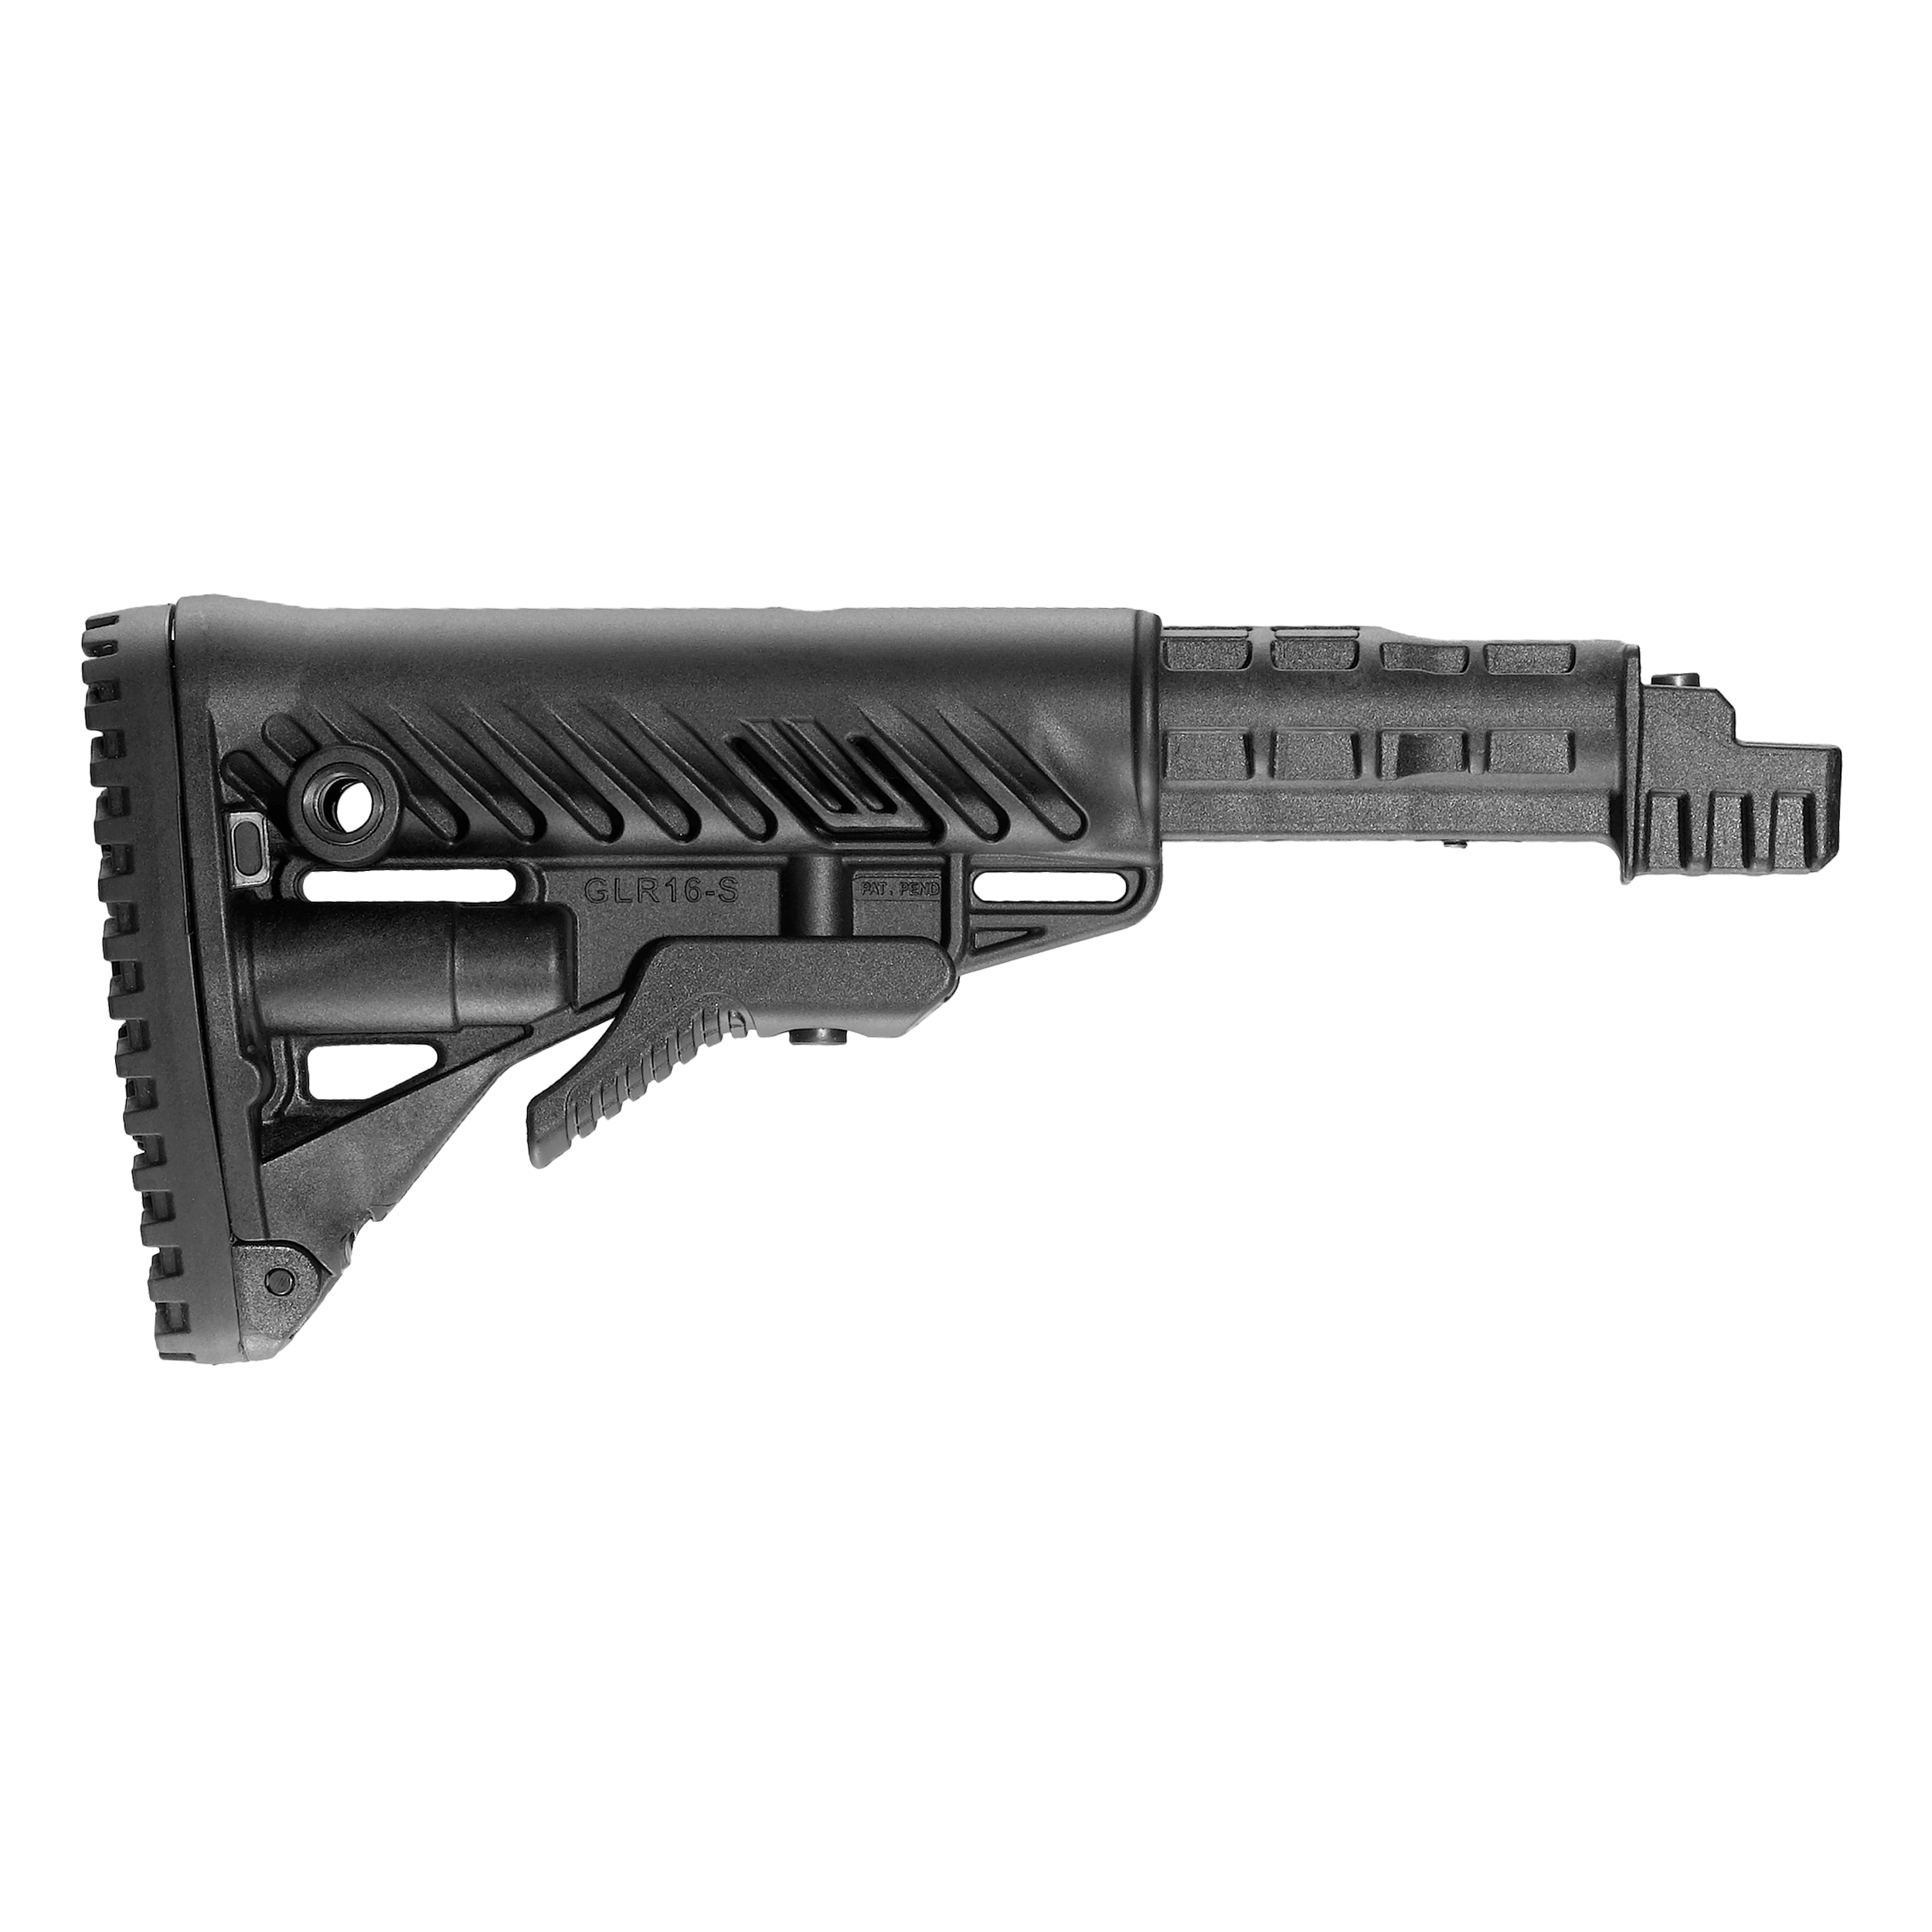 AK47 collapsible buttstock / AR15 Style